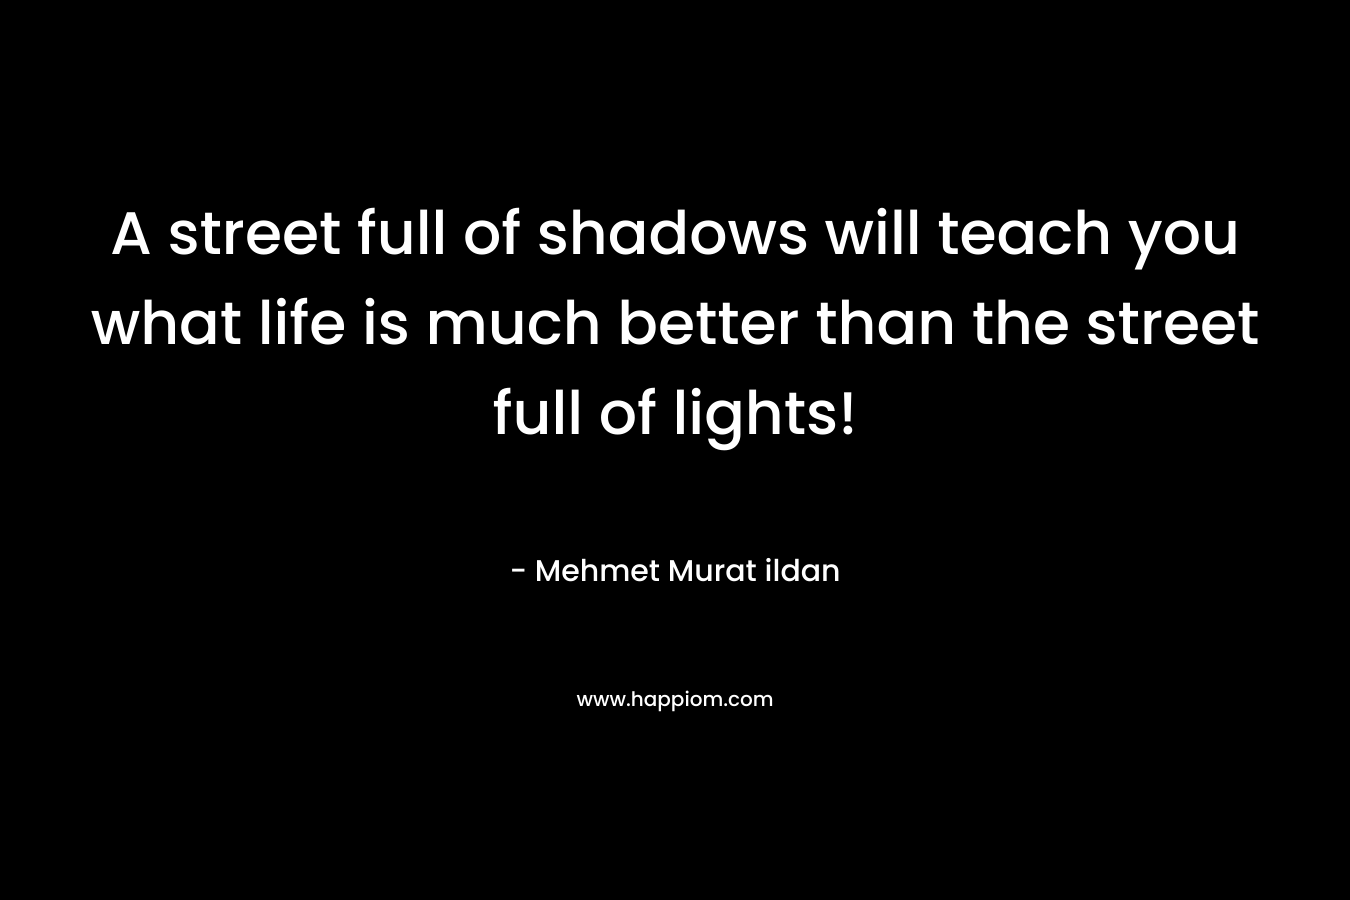 A street full of shadows will teach you what life is much better than the street full of lights!